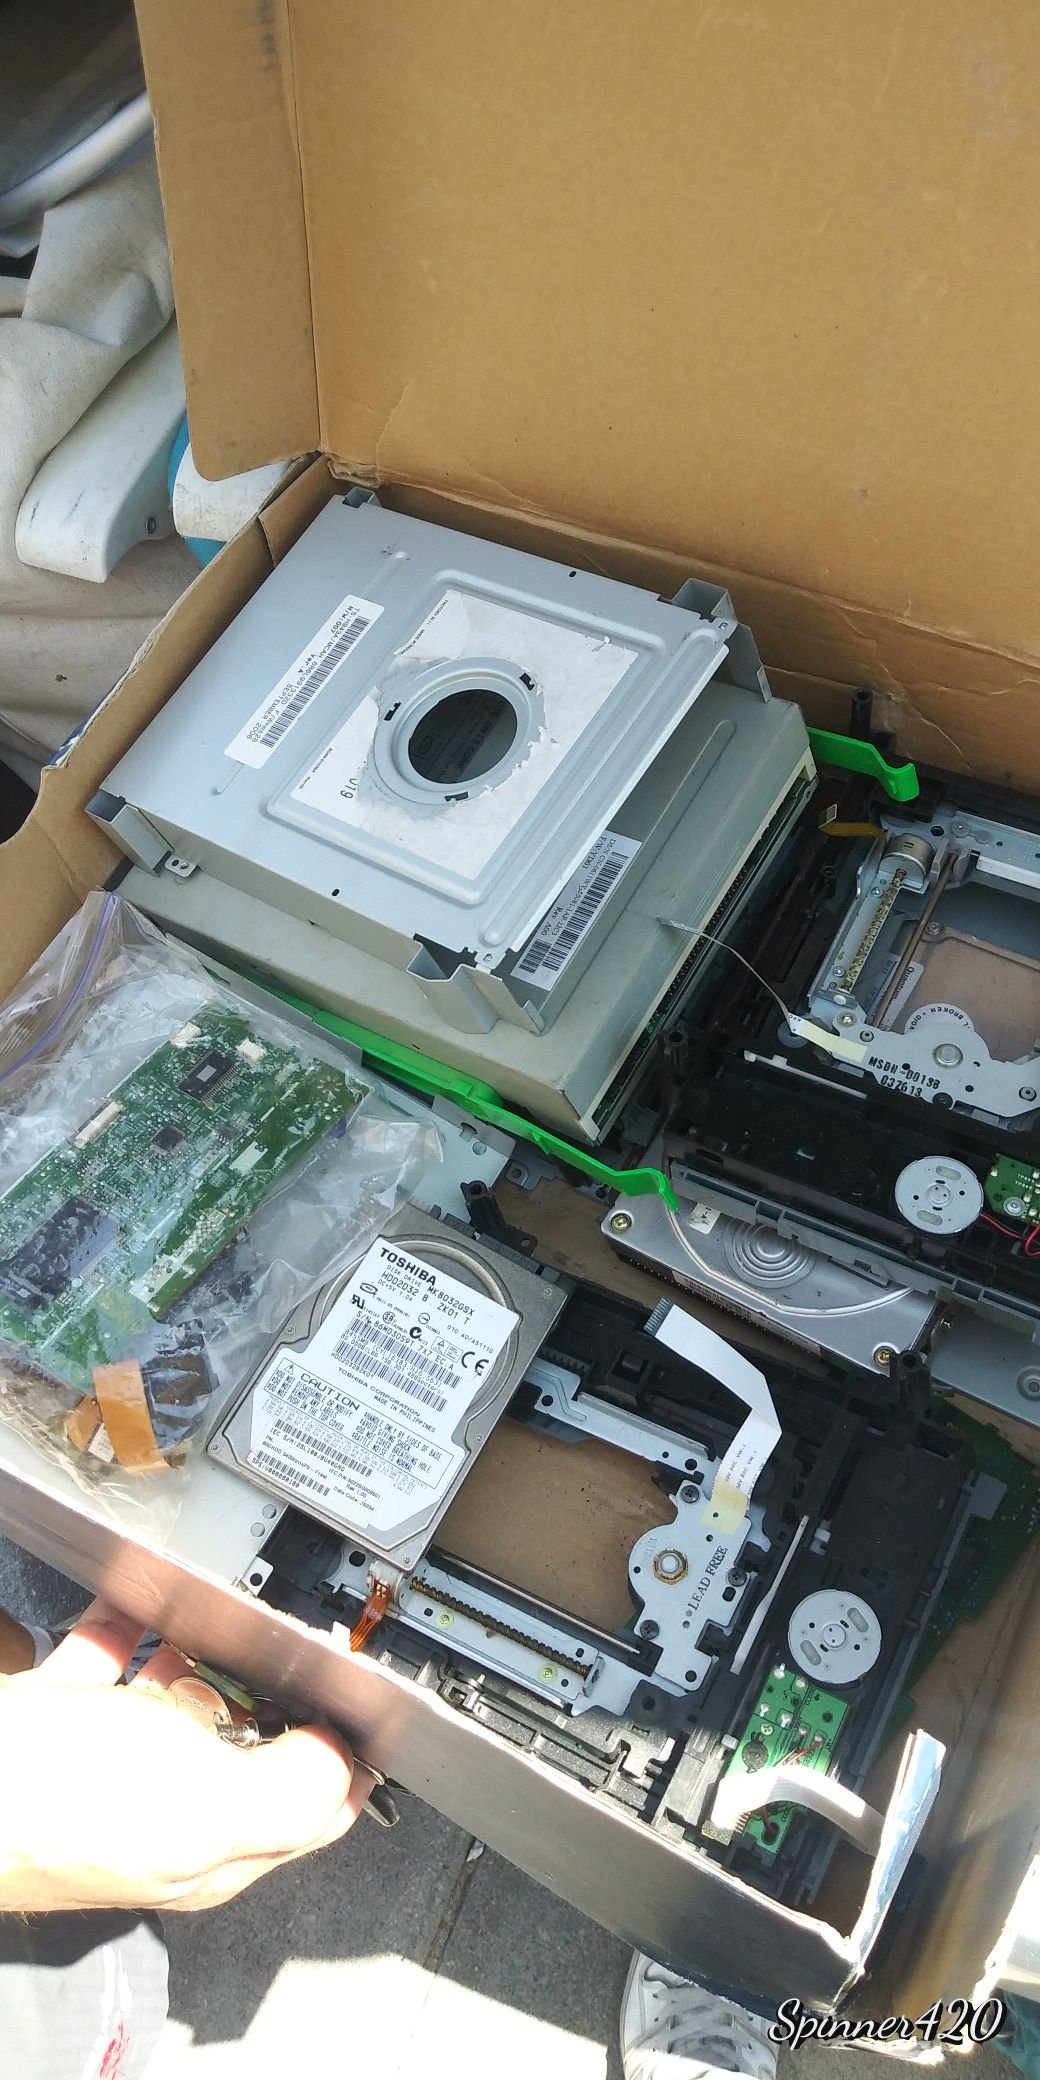 Misc. Computer disc drives and hard drives